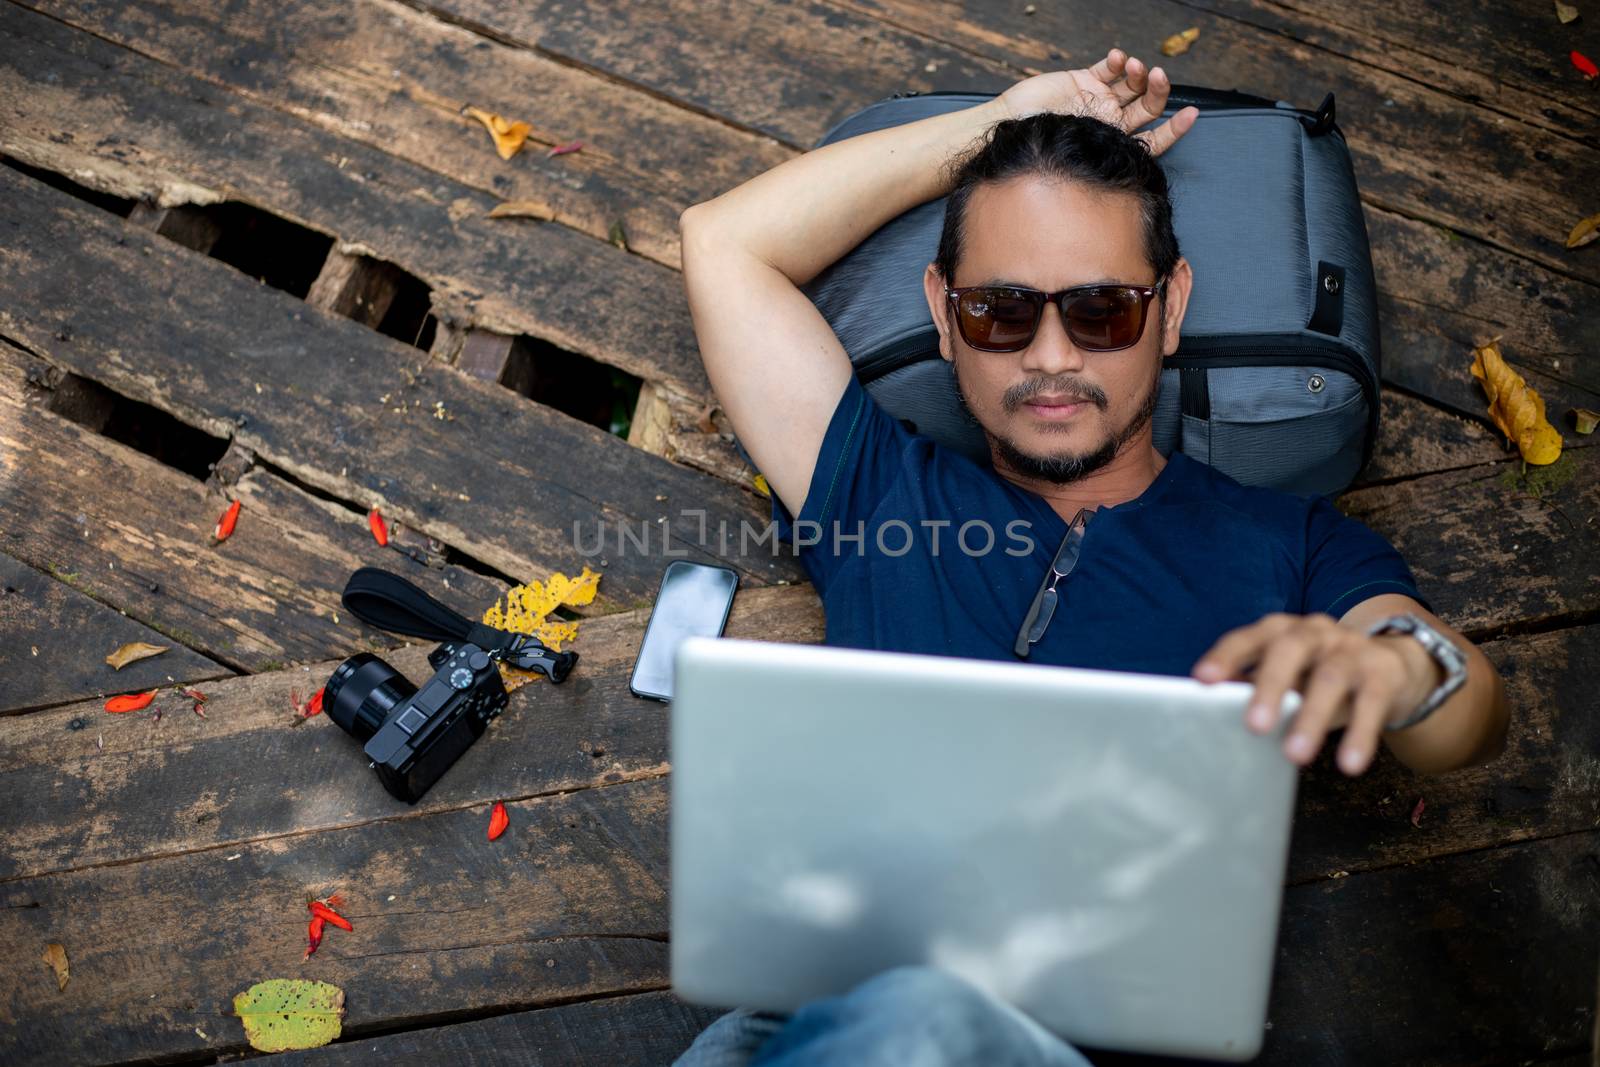 Asian men backpacks and traveler working on computer laptop at outdoor nature and He is relaxing and enjoying on travel